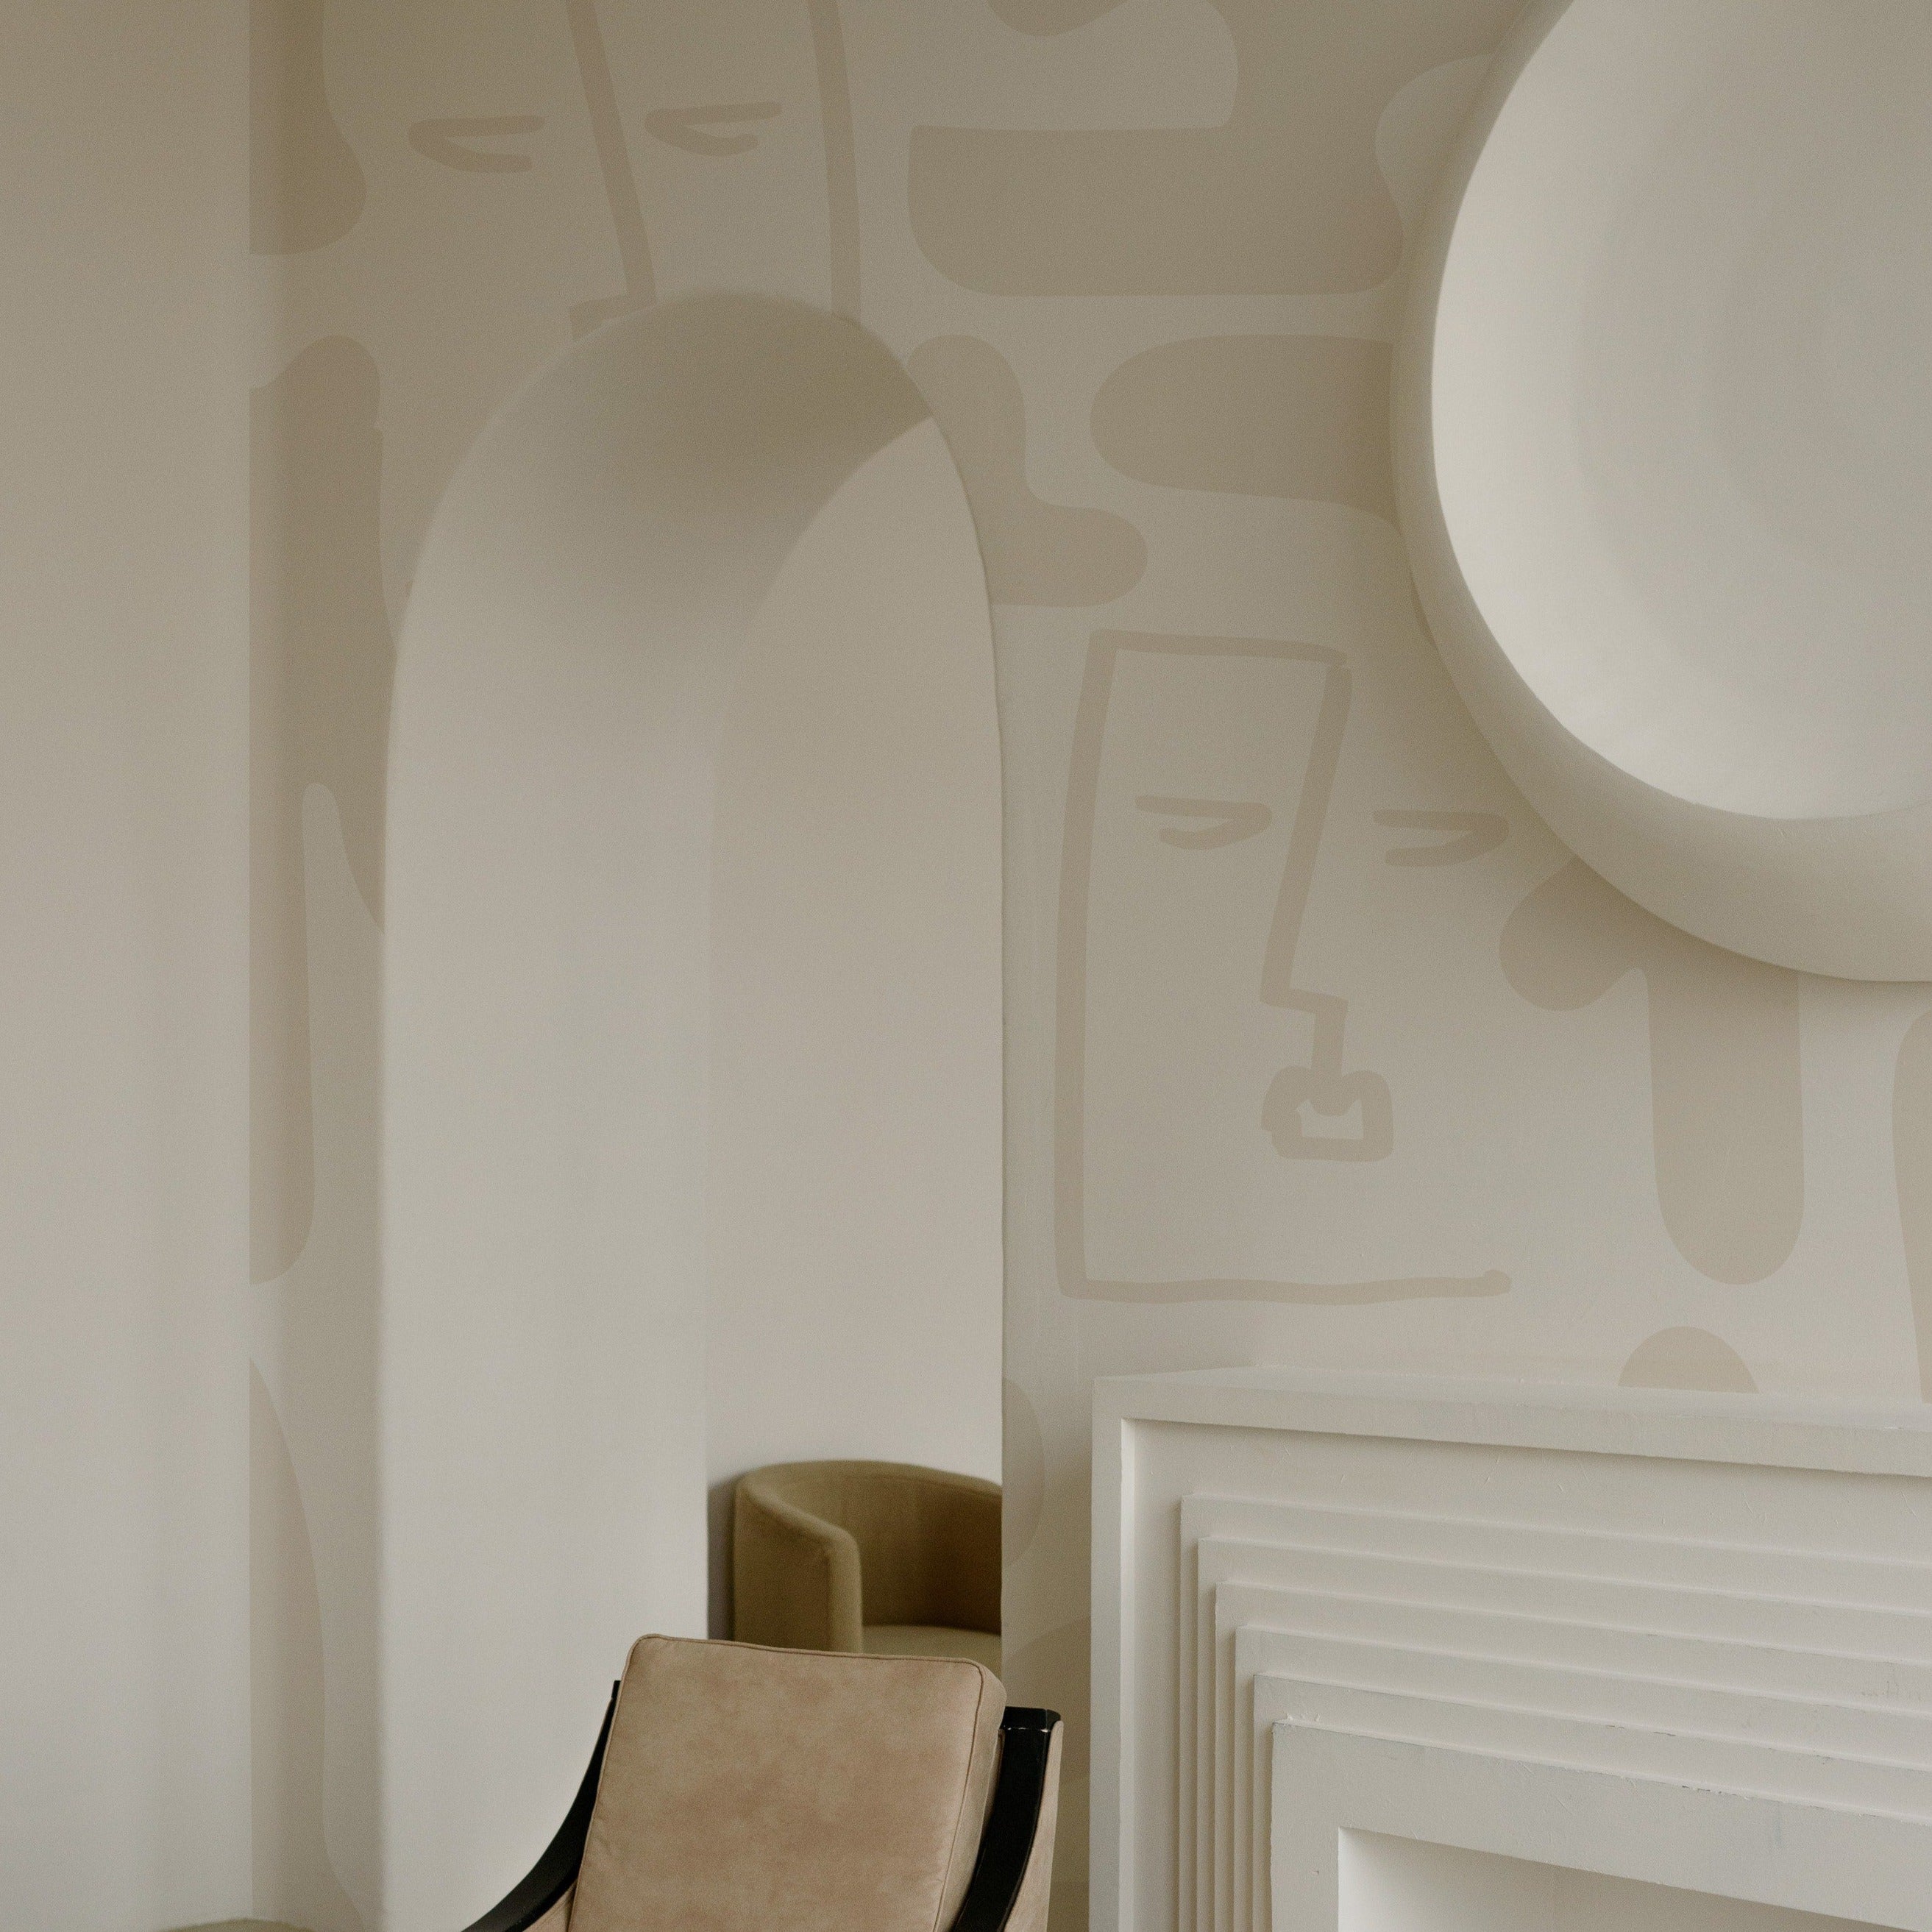 Minimalist Boho Wallpaper with abstract linear faces and organic shapes in neutral beige tones, adorning a living room with elegant decor, including an armchair and a modern fireplace.